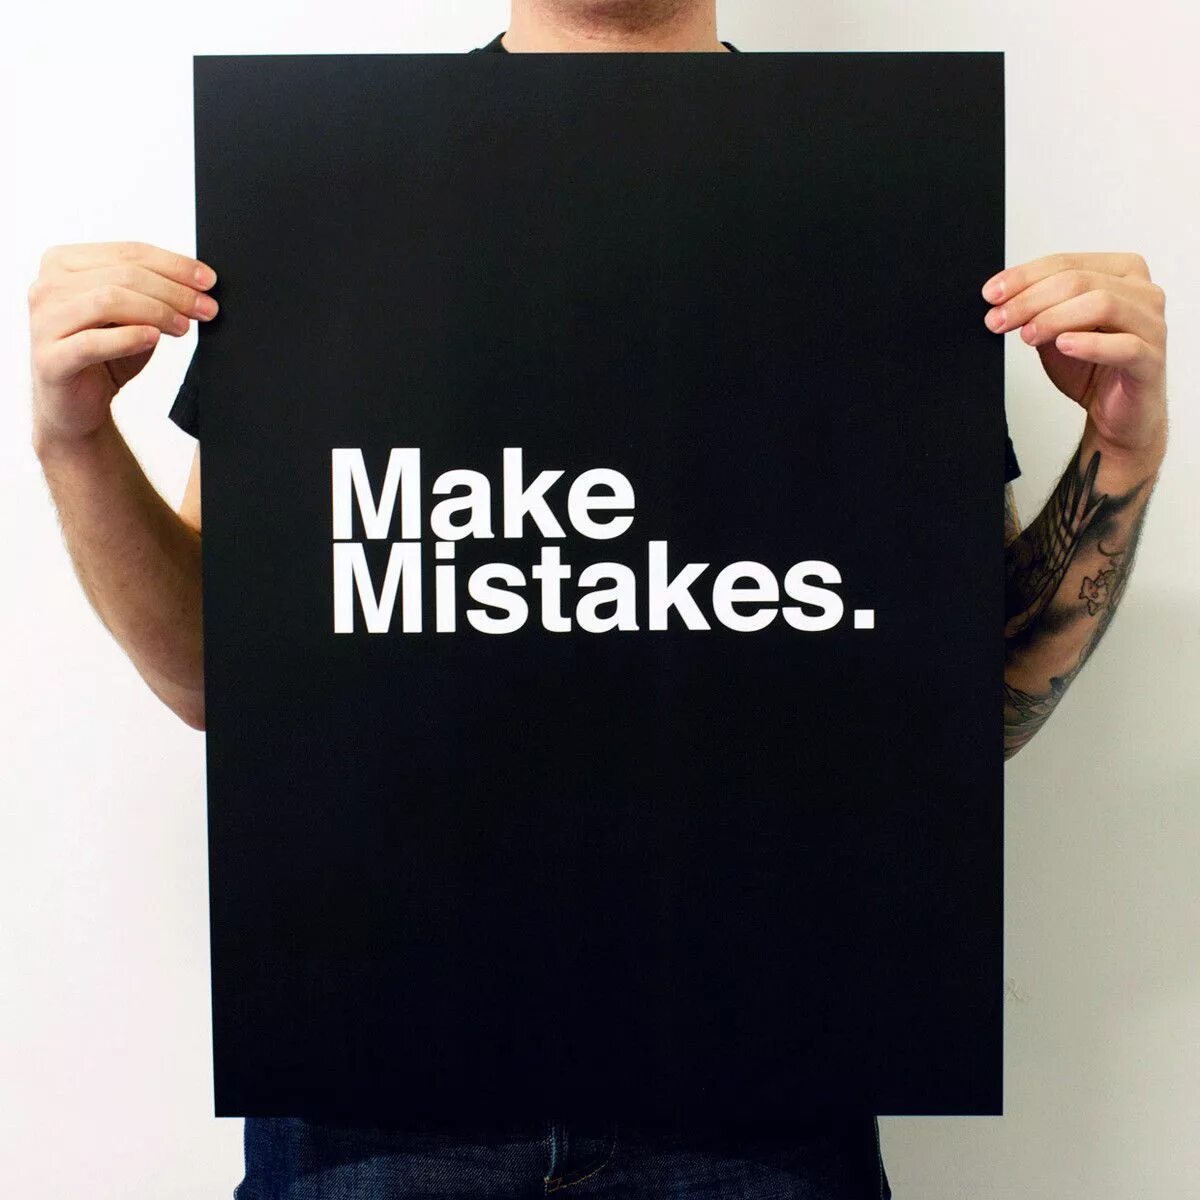 Make a mistake. Making mistakes. The mistake надпись. Mistakes картинки. Make mistake good